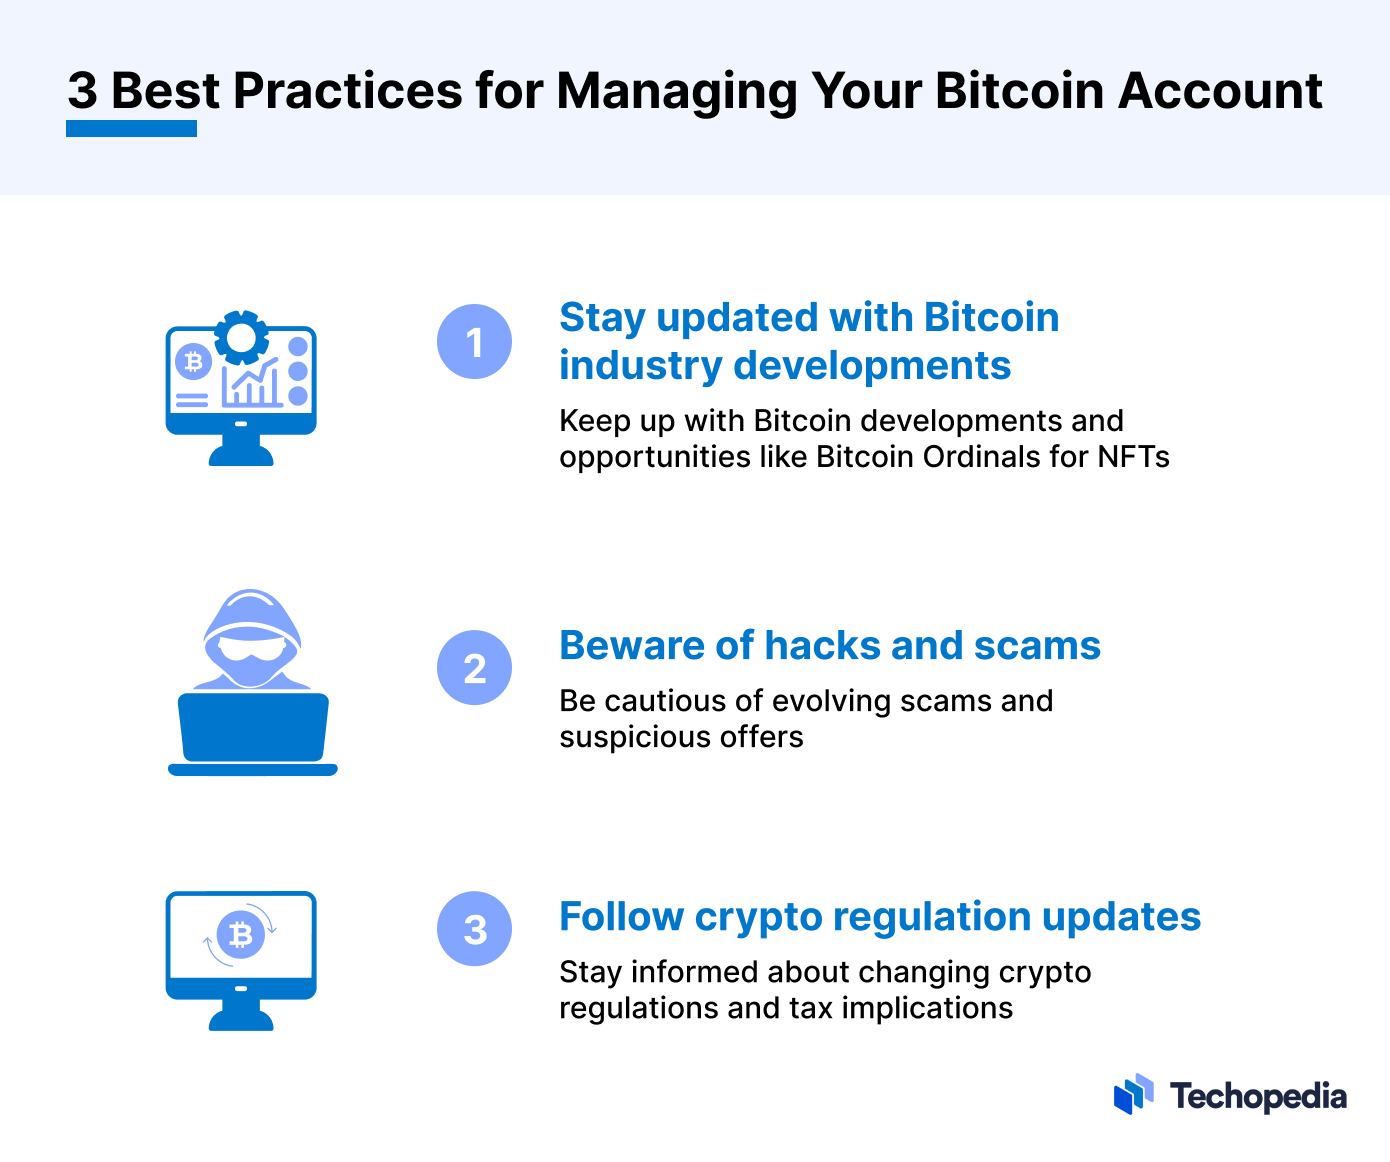 3 Best Practices for Managing Your Bitcoin Account